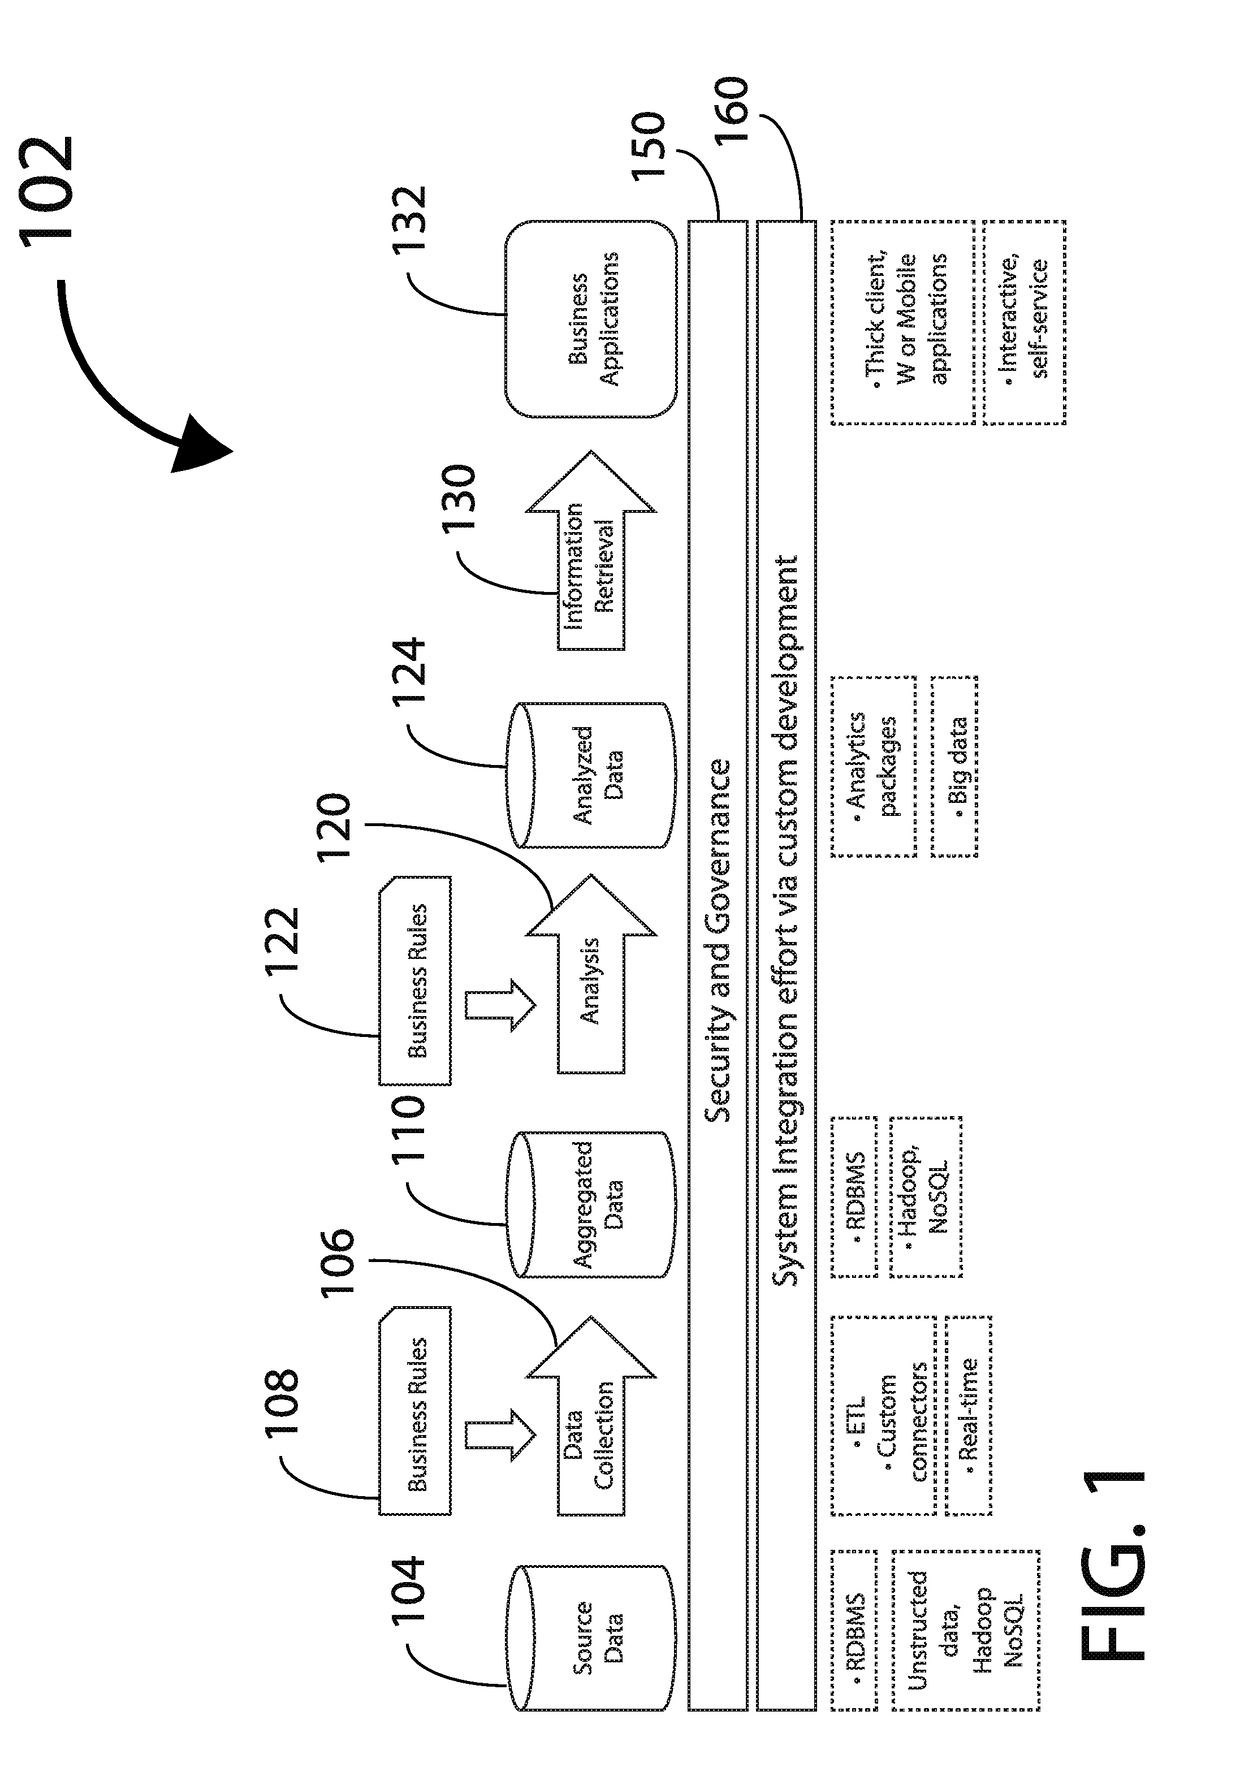 Methods and apparatus for analysis of structured and unstructured data for governance, risk, and compliance